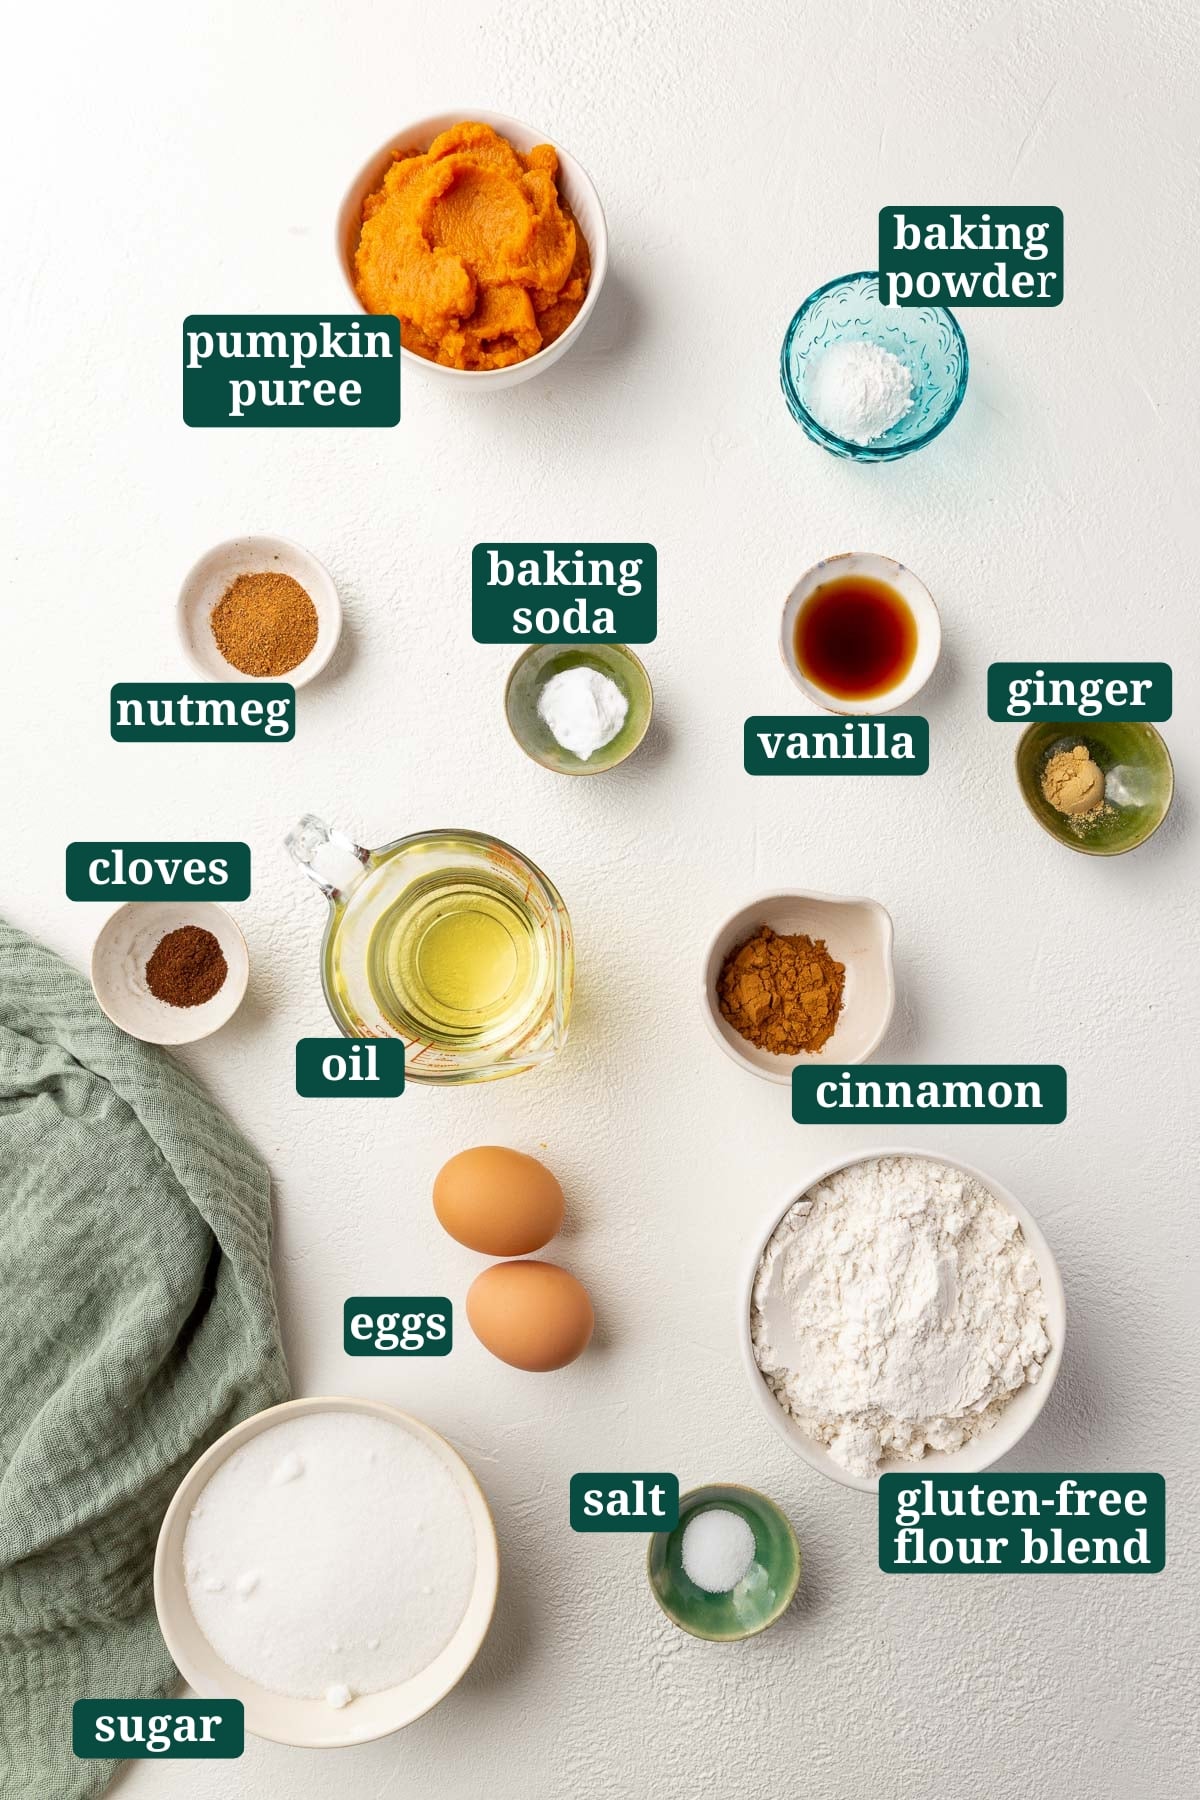 An overhead view of ingredients in small bowls to make gluten free pumpkin bread including pumpkin puree, baking powder, nutmeg, baking soda, vanilla, ginger, cloves, oil, cinnamon, eggs, salt, gluten-free flour blend, and sugar with text overlays over each ingredient.